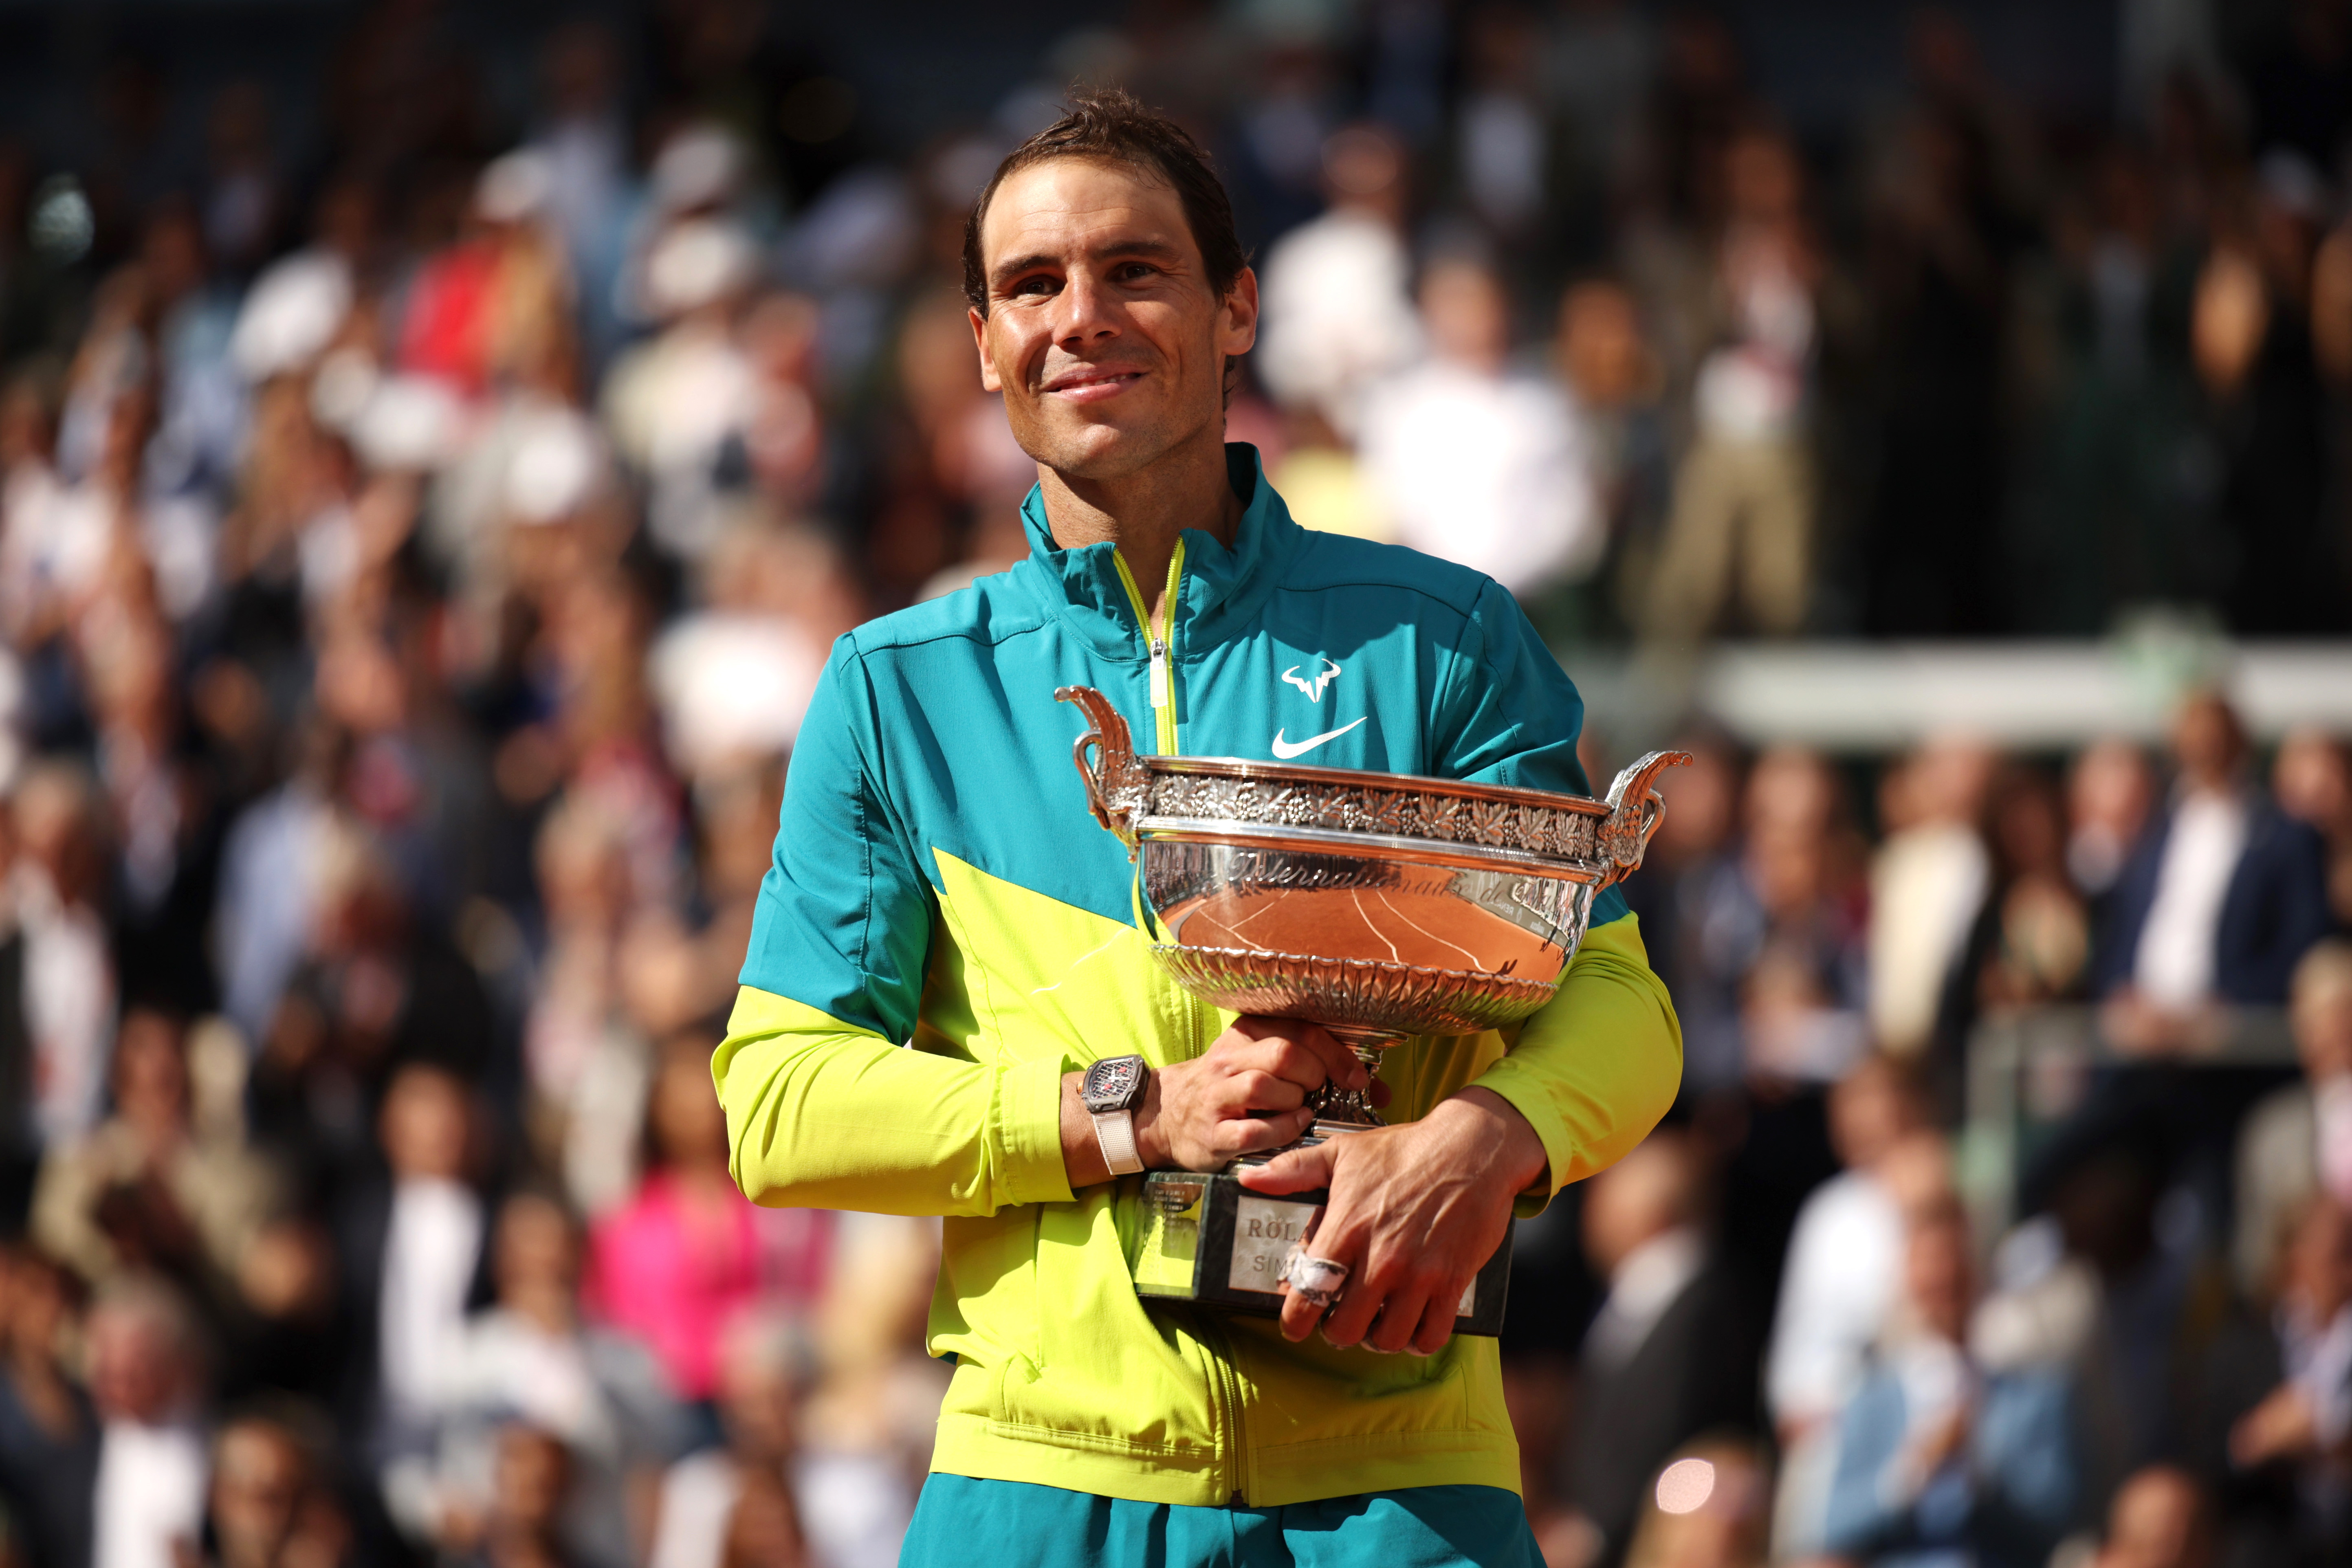 Rafael Nadal: 22 stats for his 22nd Grand Slam title